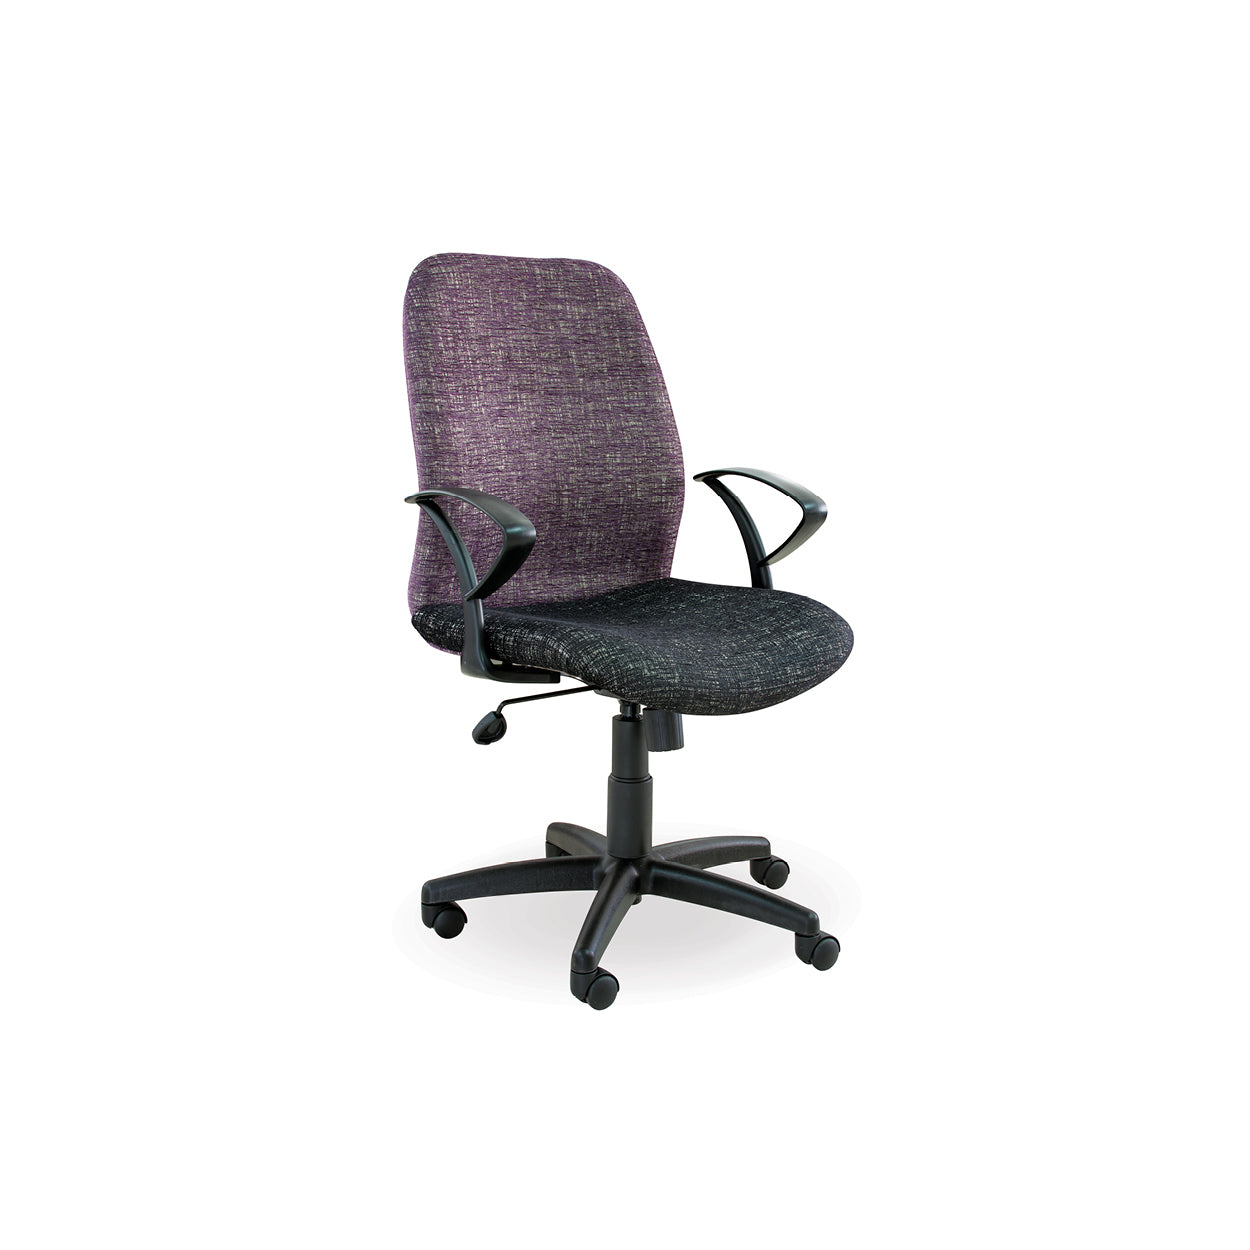 Hedcor office chair